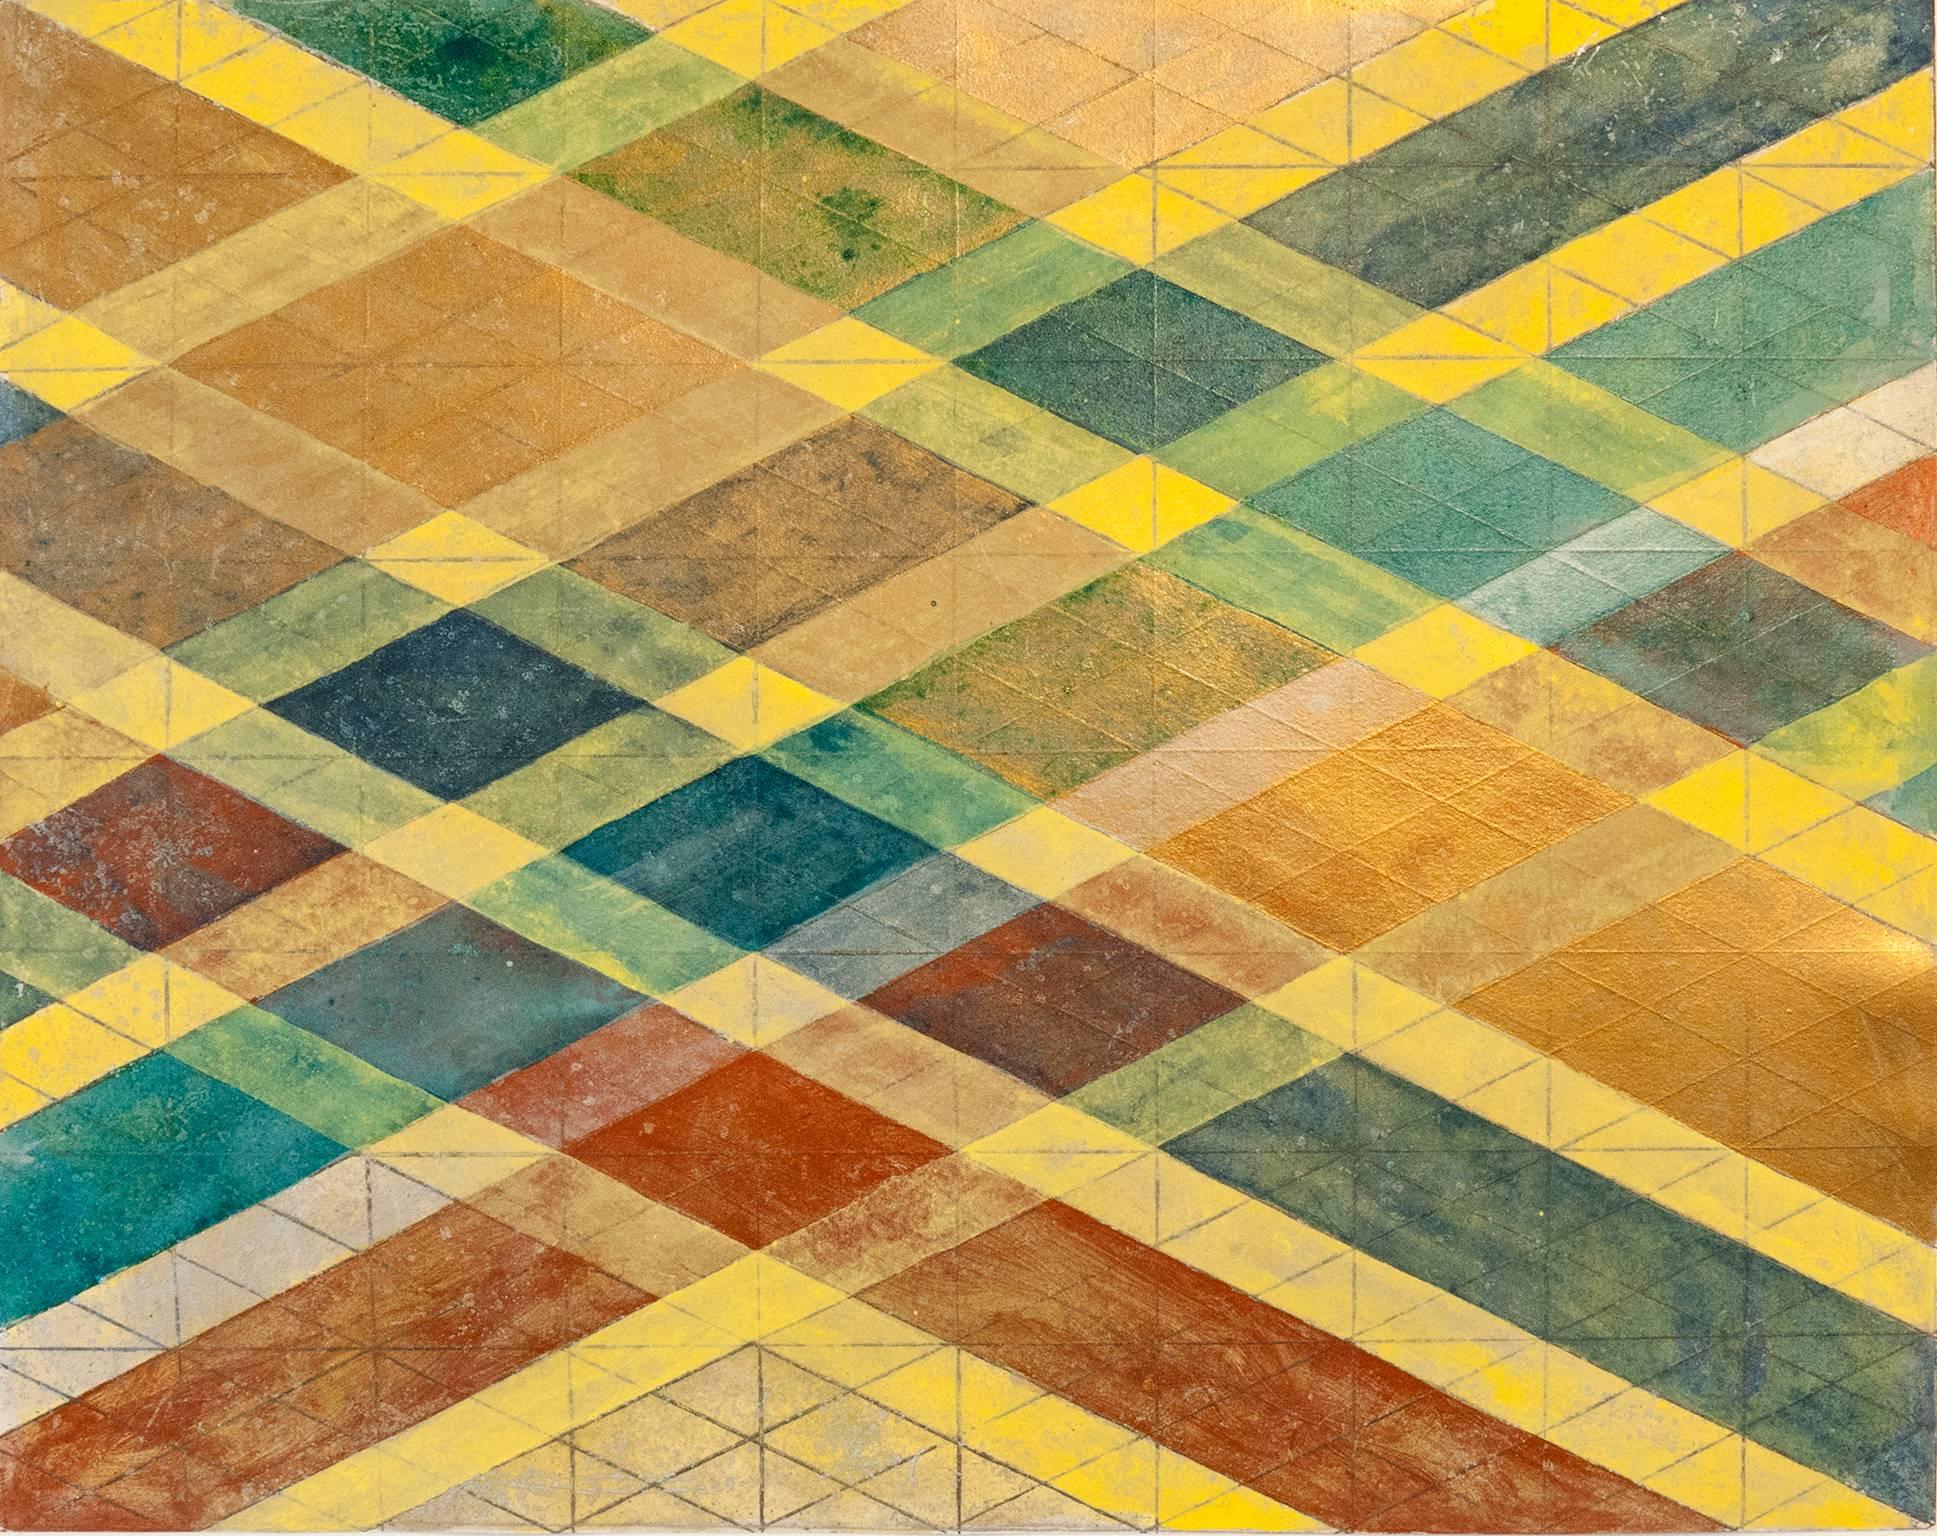 Arlene Slavin Abstract Print - "Intersections/Skies 20", abstract geometric monoprint, red, yellow, blue, gold.